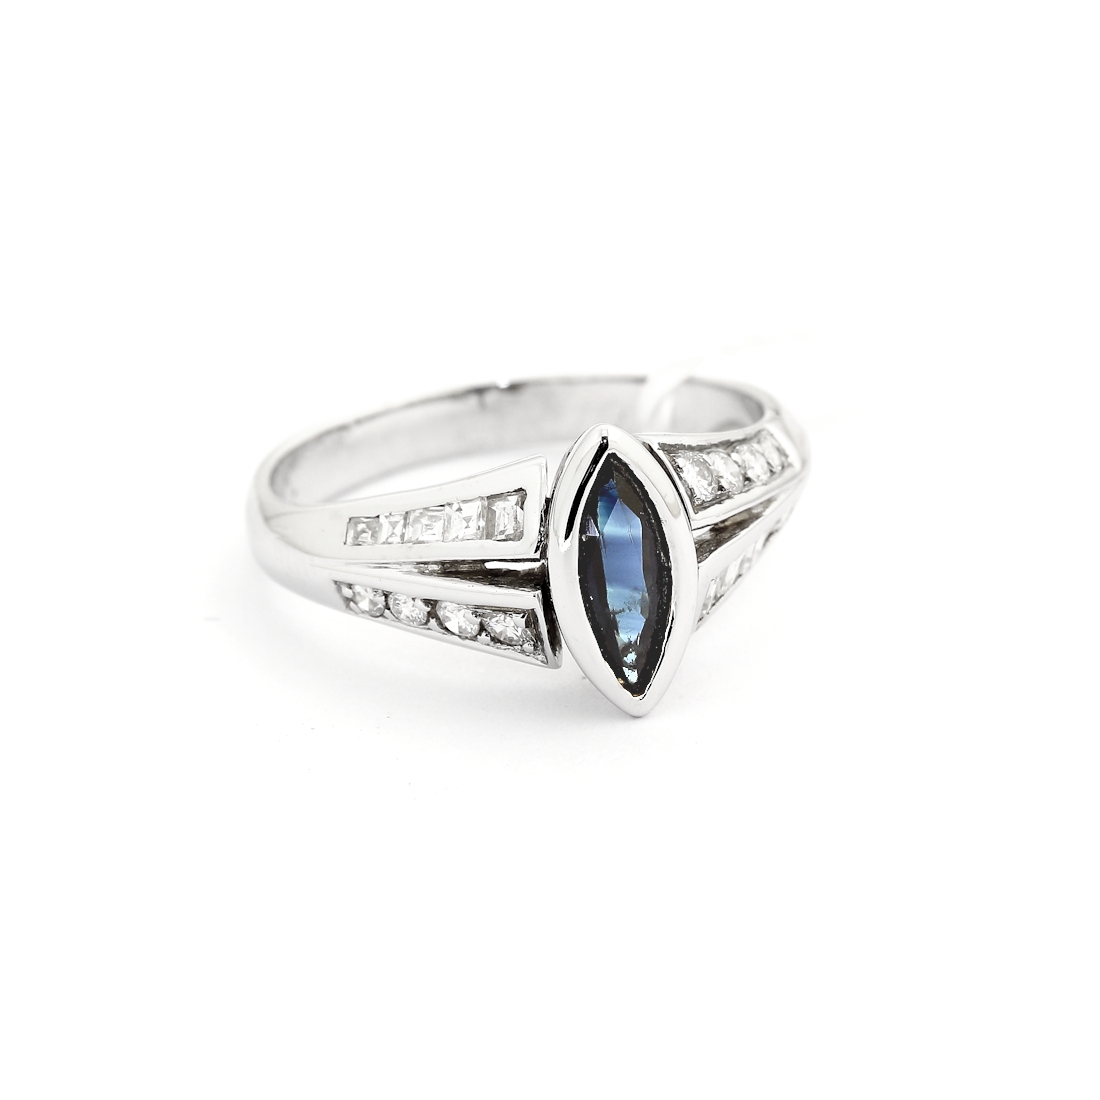 750 Mill. White Gold Ring with 0,66 Ct. Diamonds and 0,96 Ct. Sapphire